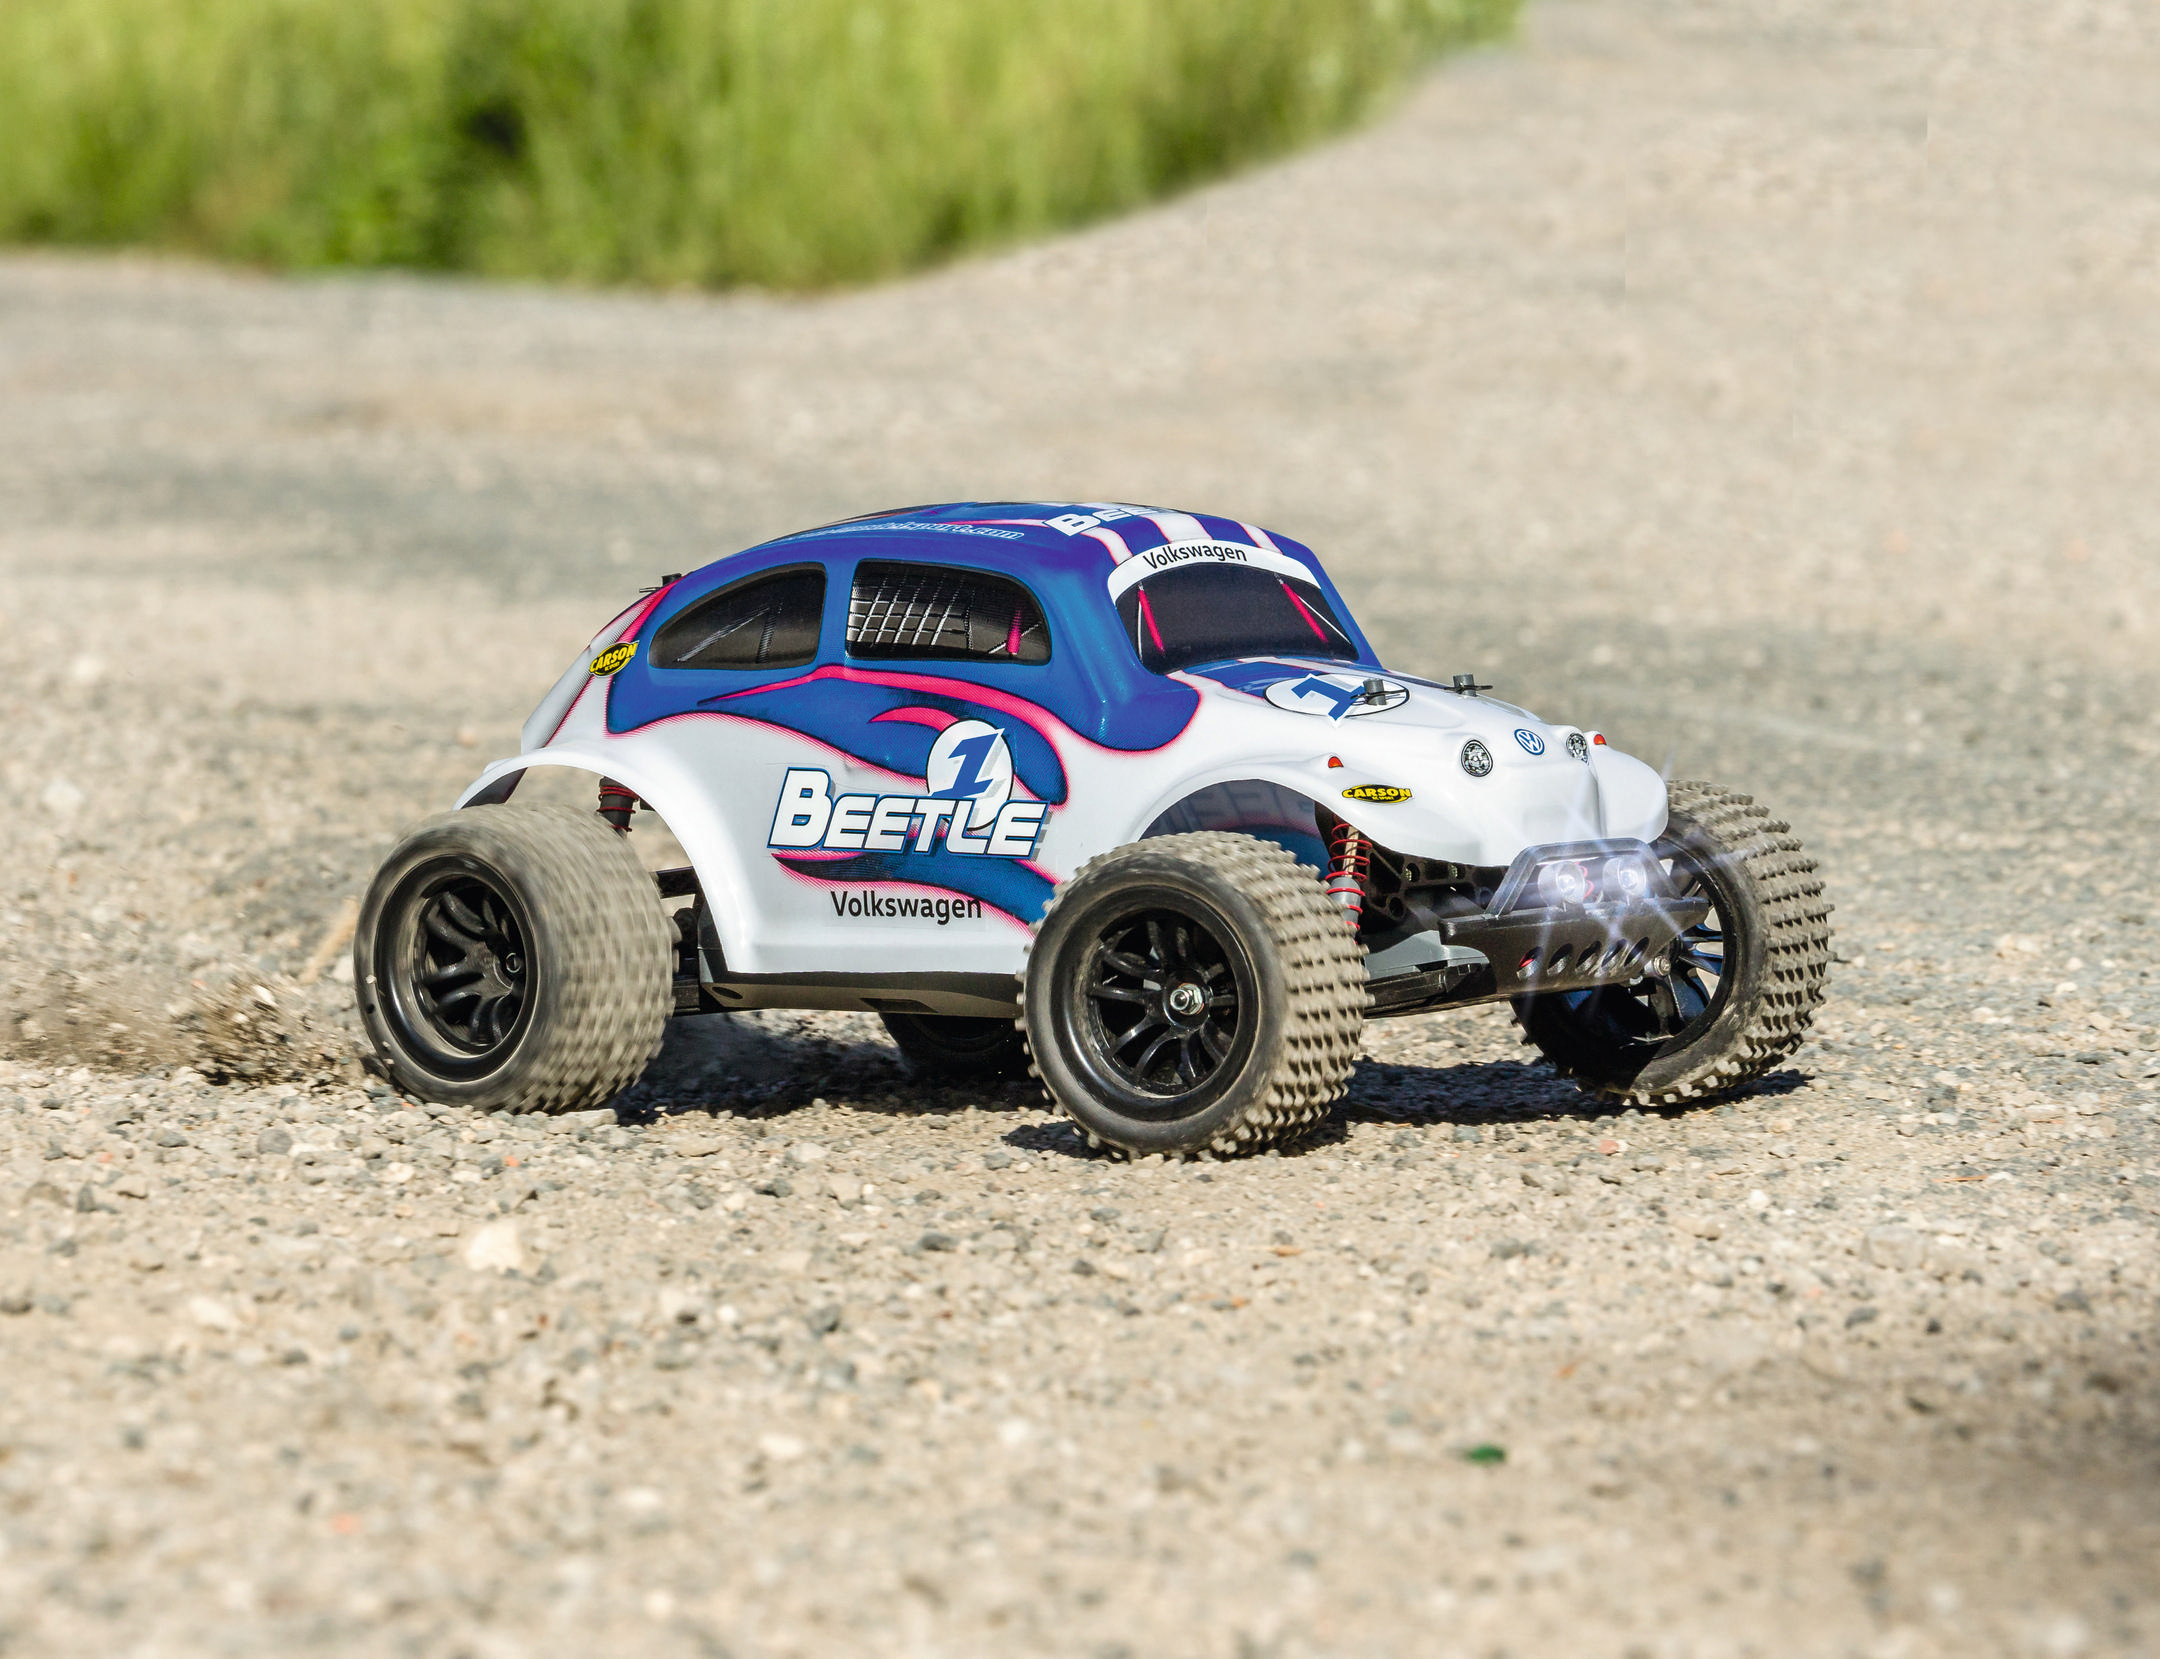 Spielzeugmodell, Beetle 2.4G VW Mehrfarbig FE RTR CARSON 1:10 100%